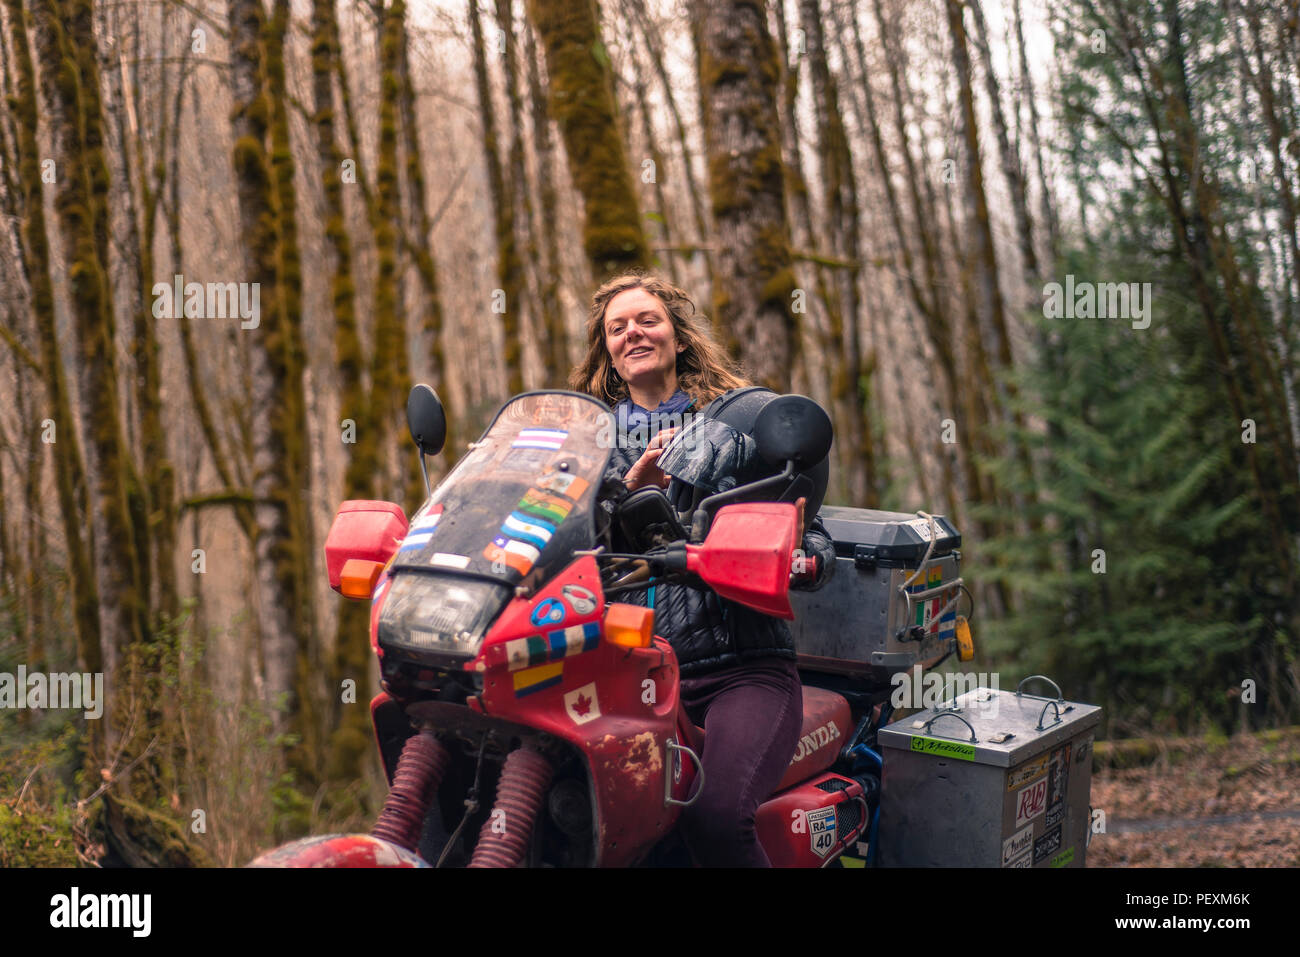 Smiling woman on motorcycle in forest Stock Photo